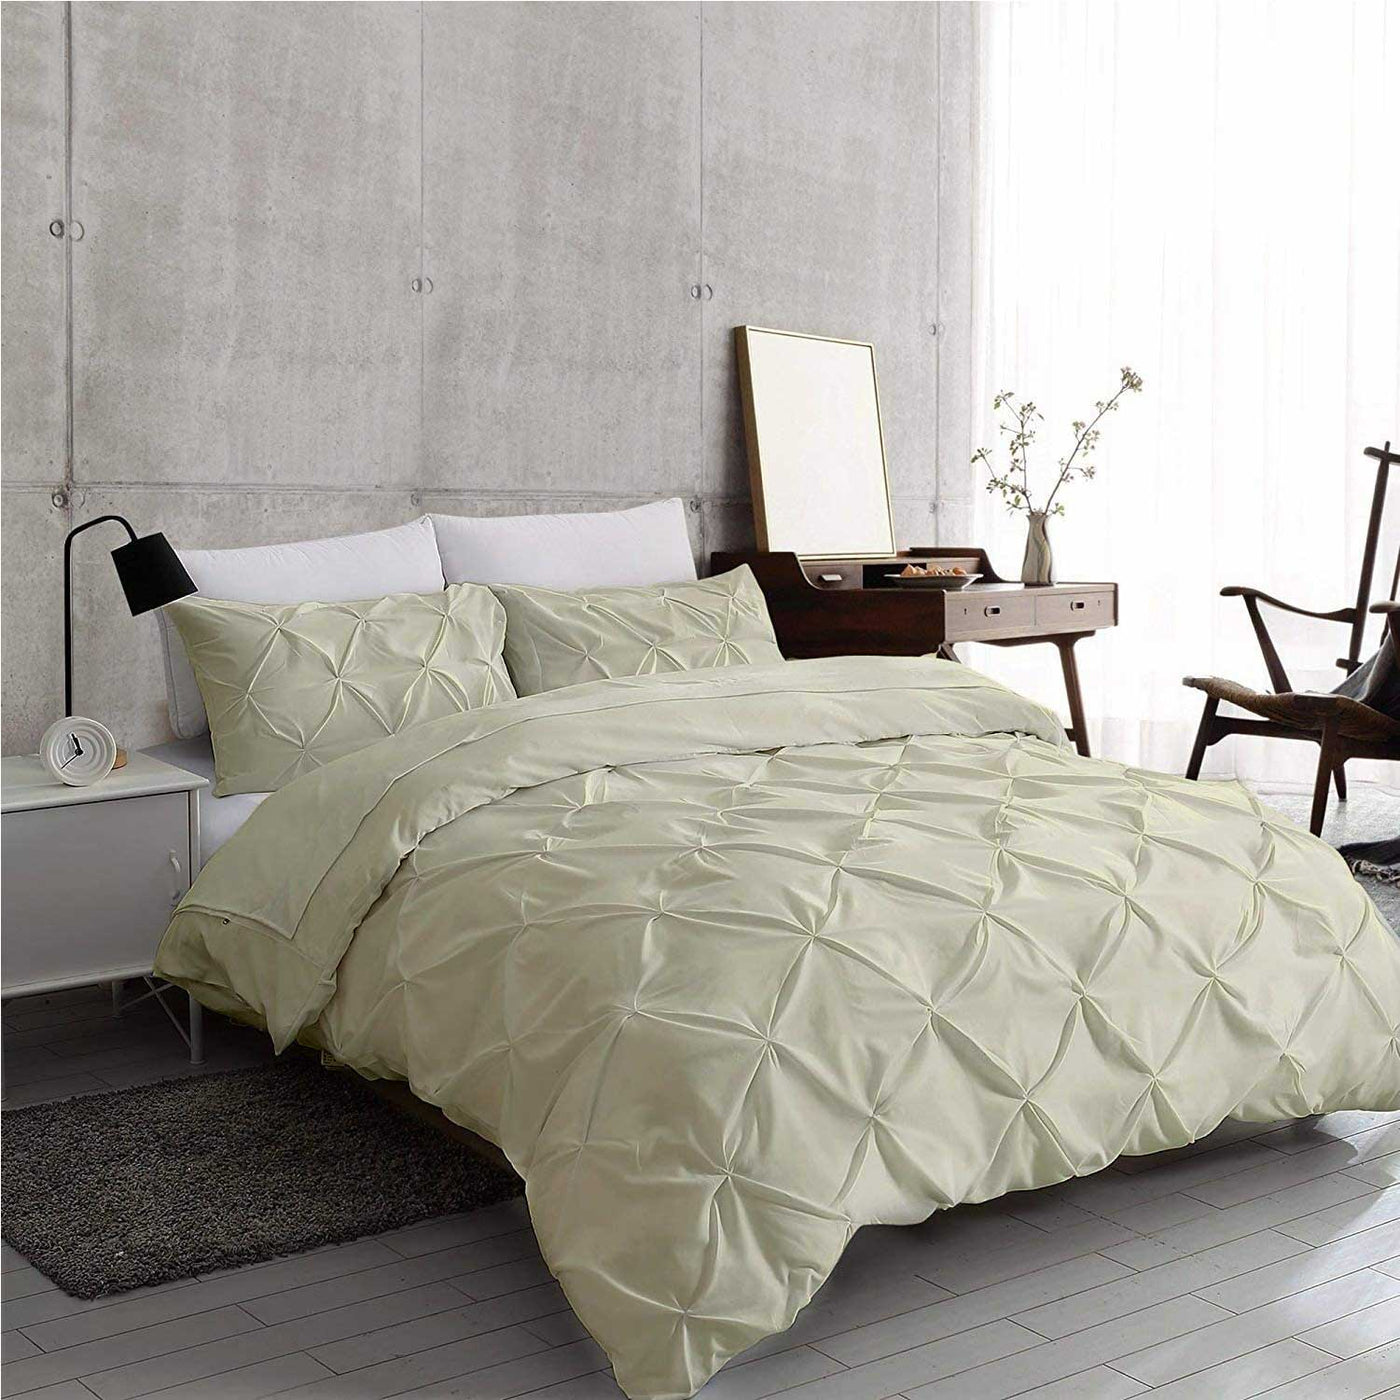 Pinch Pleated Duvet Cover Set 1000 Thread Count - Light Colors